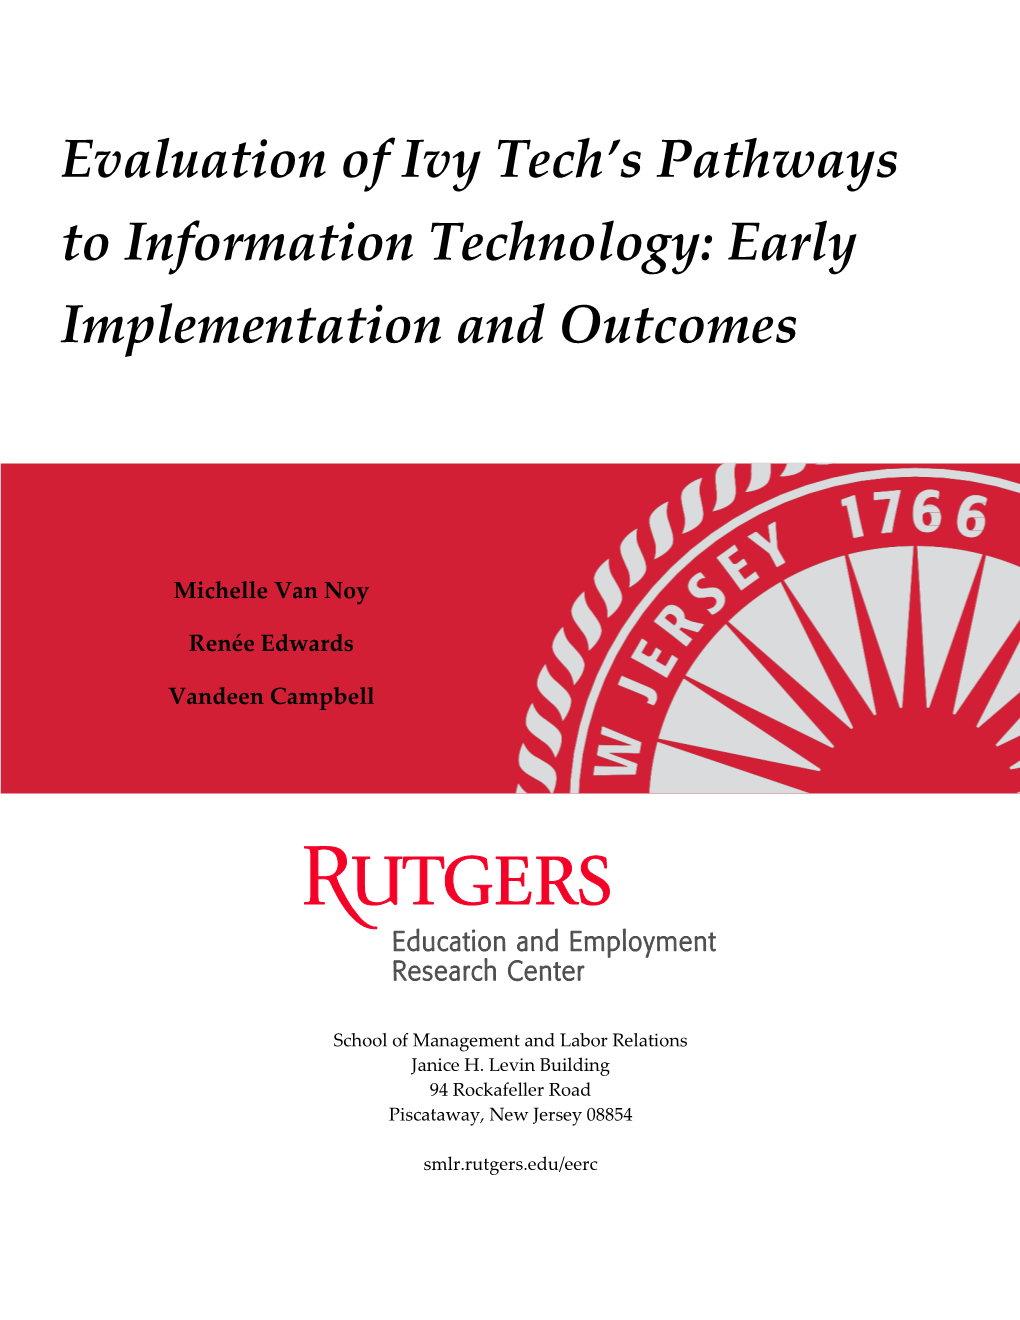 Evaluation of Ivy Tech's Pathways to Information Technology